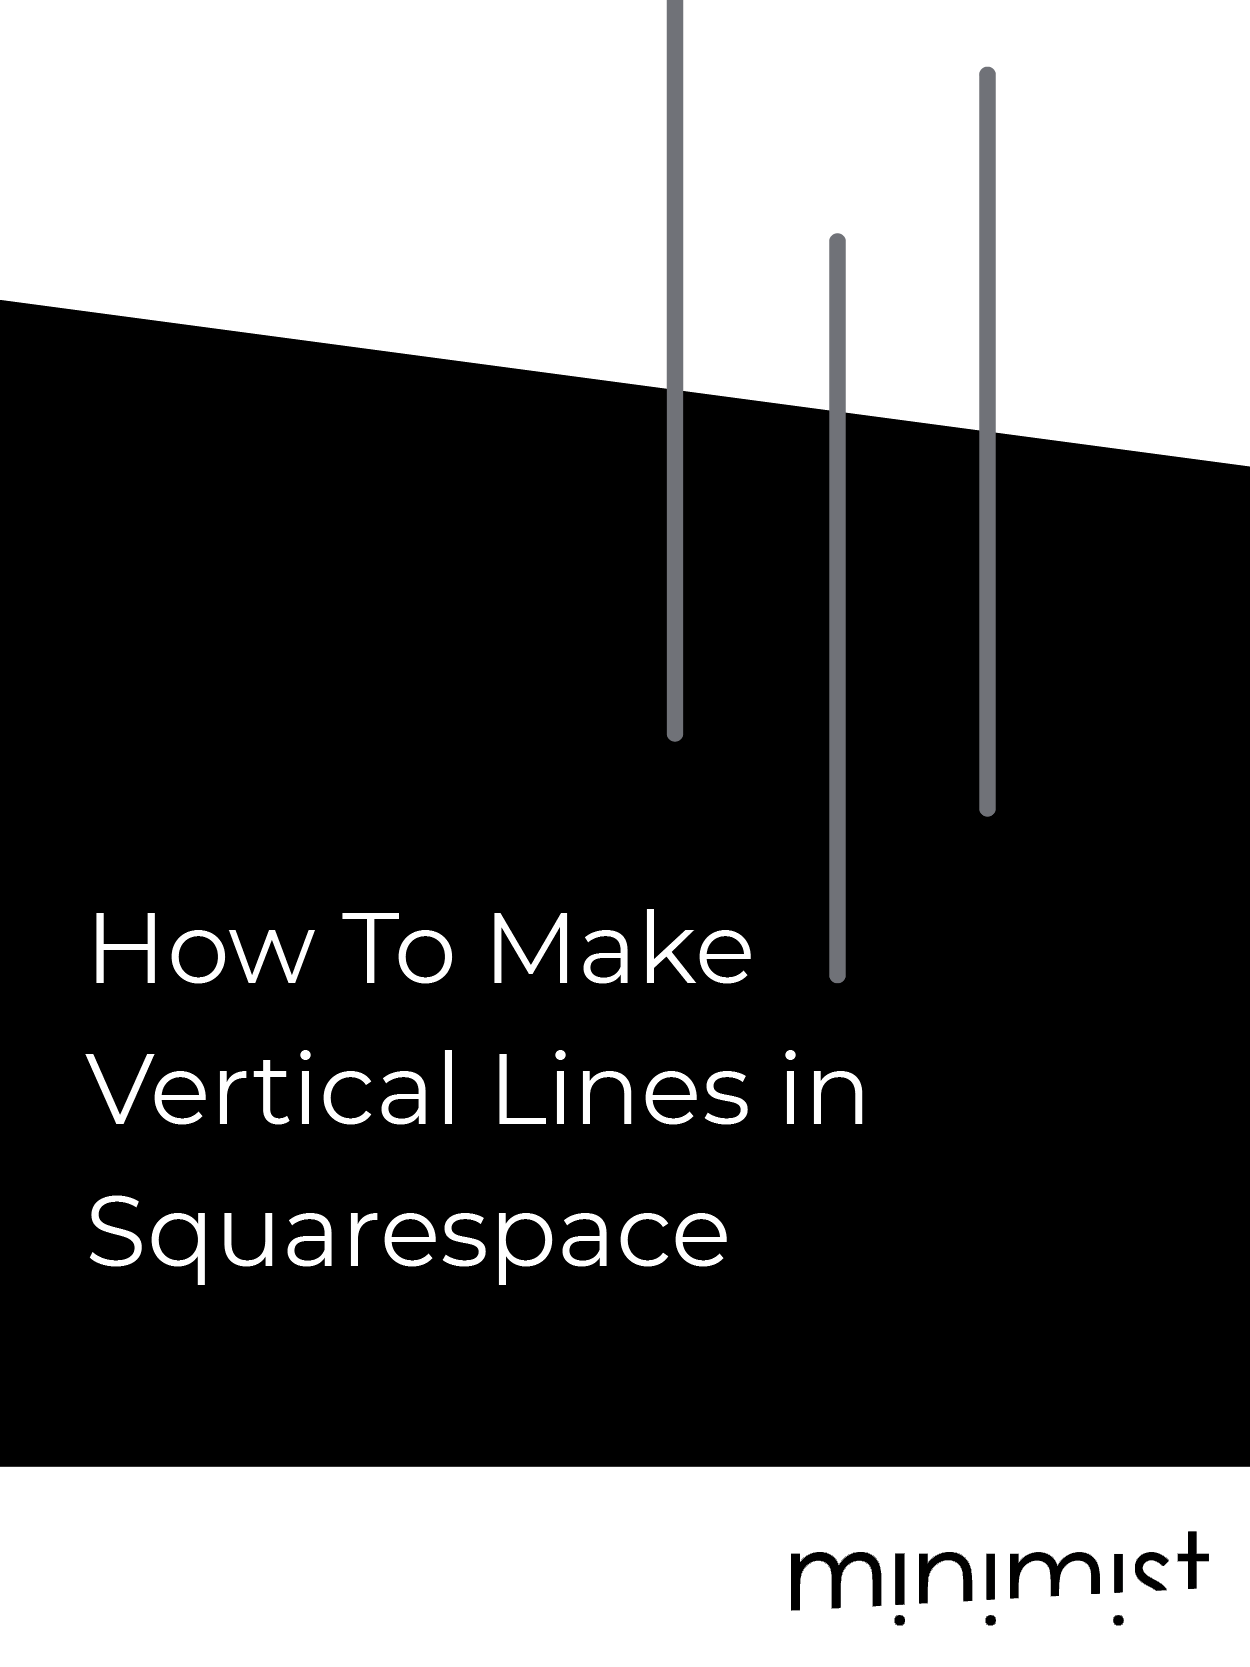 How To Make Vertical Lines in Squarespace — Minimist Website Design